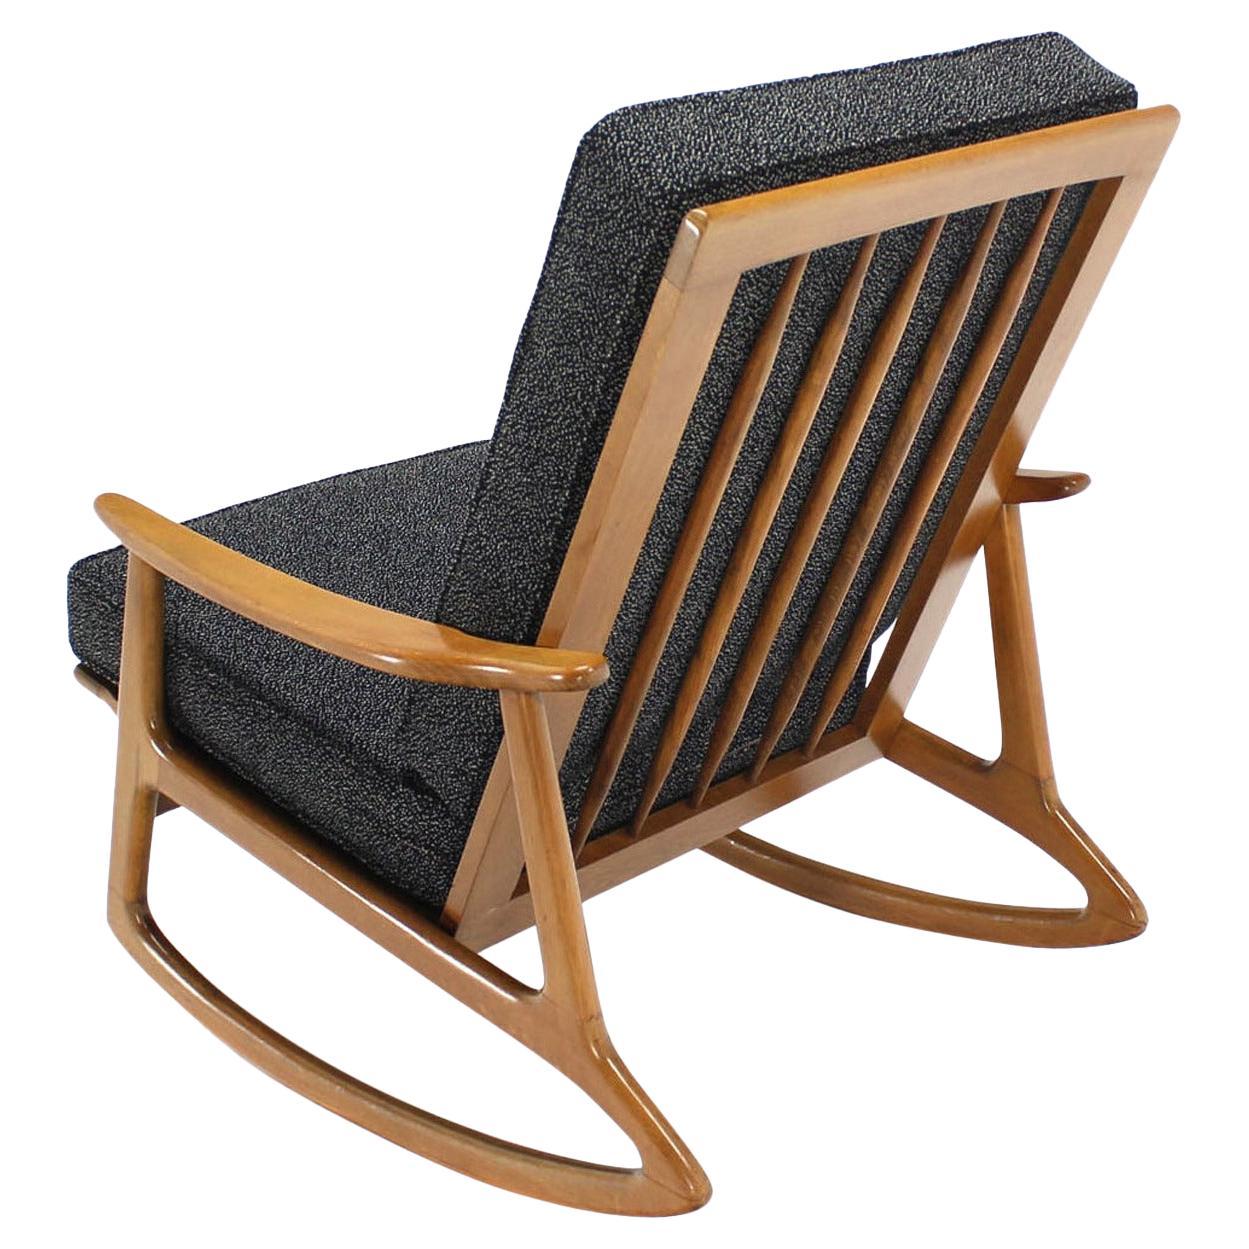 Blond Wood Danish Modern Slated Back Rocking Lounge Chair New Upholstery MINT For Sale